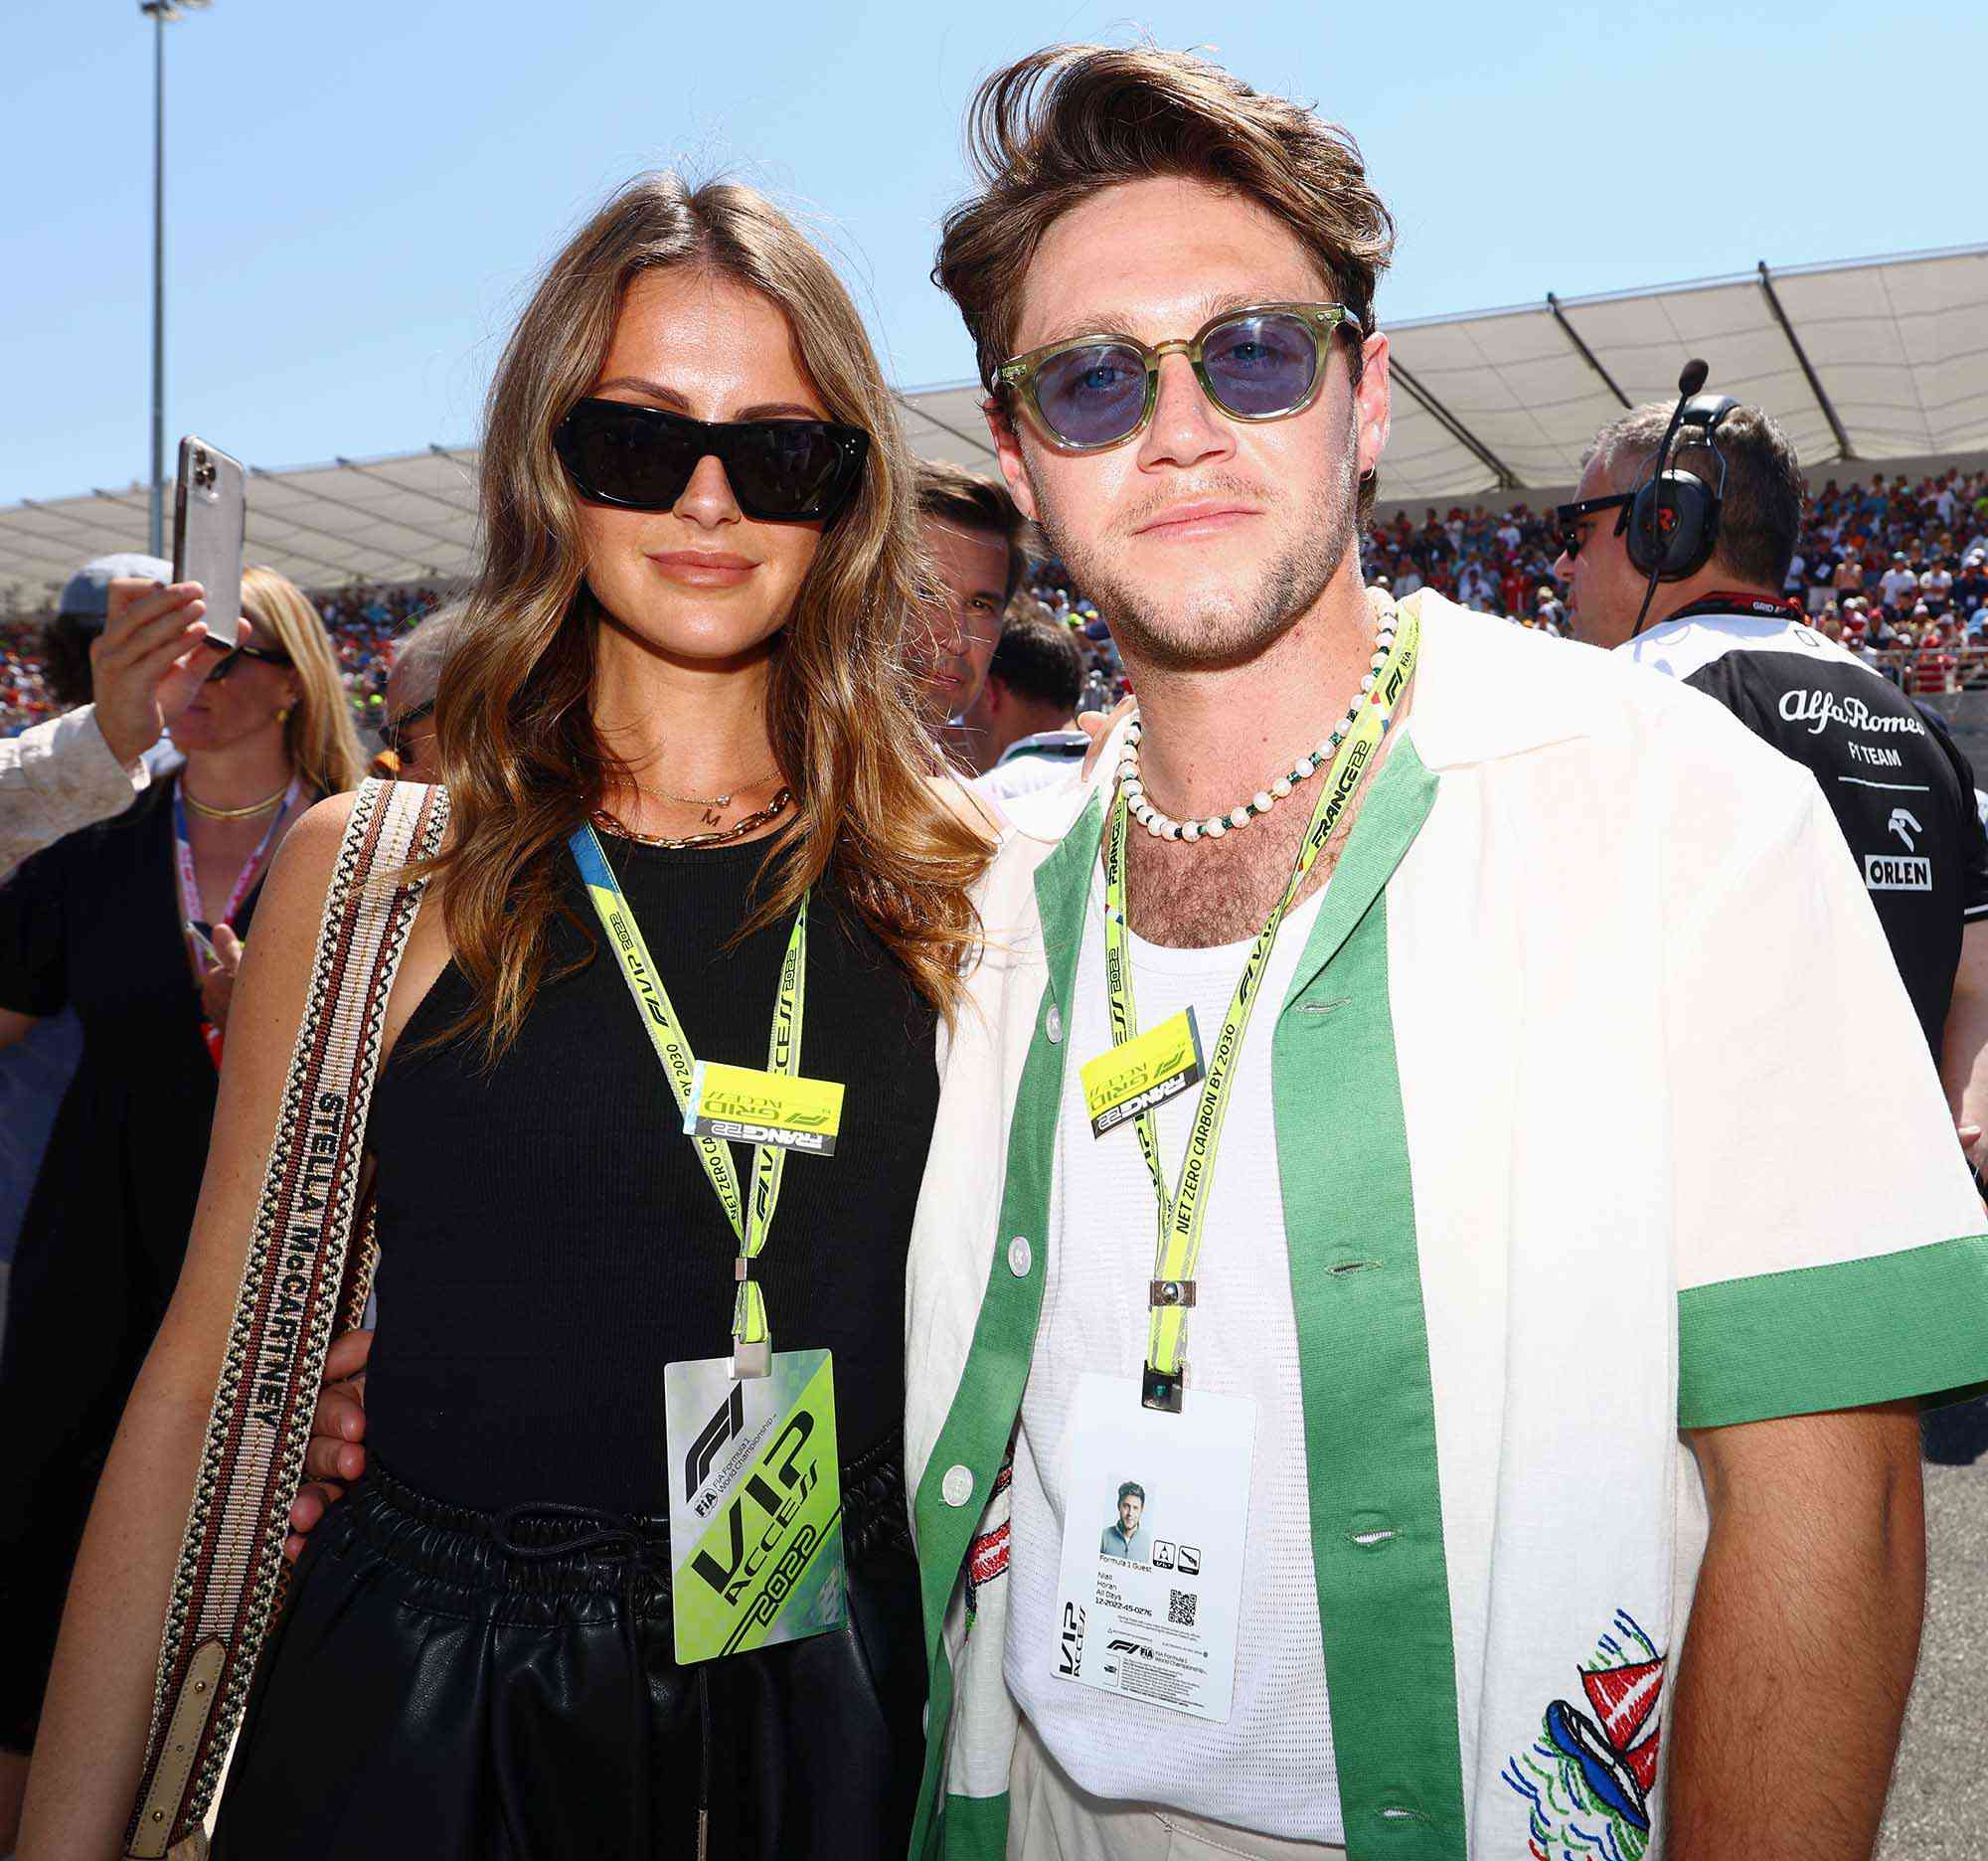 Niall Horan and Amelia Woolley pose for a photo on the grid during the F1 Grand Prix of France at Circuit Paul Ricard on July 24, 2022 in Le Castellet, France